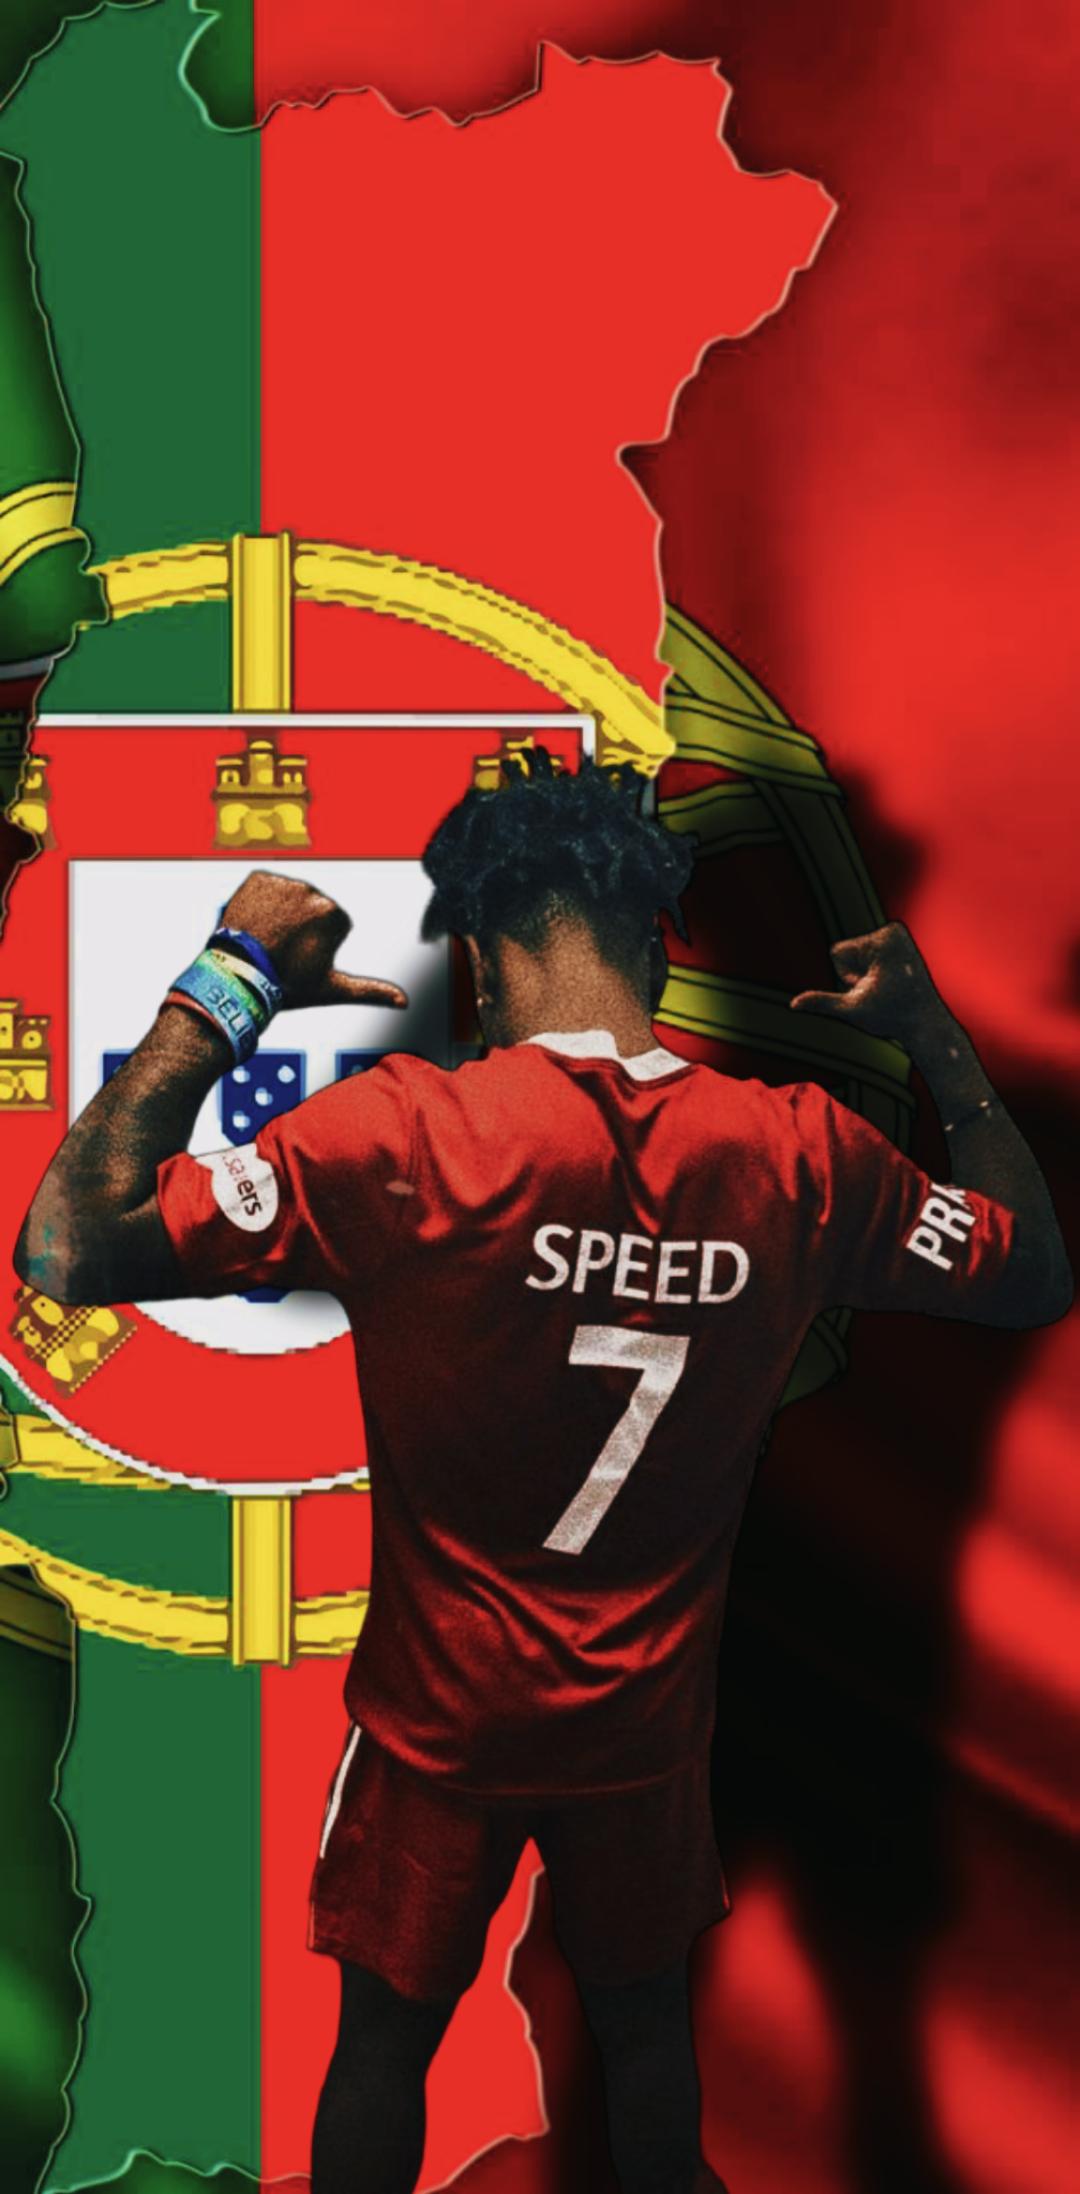 FcFreekick on Instagram The one and only ishowspeed SEWY      ishowspeed ishowspeedmemes speededit speedmemes youtub  Who is messi  Ronaldo Lil weezy